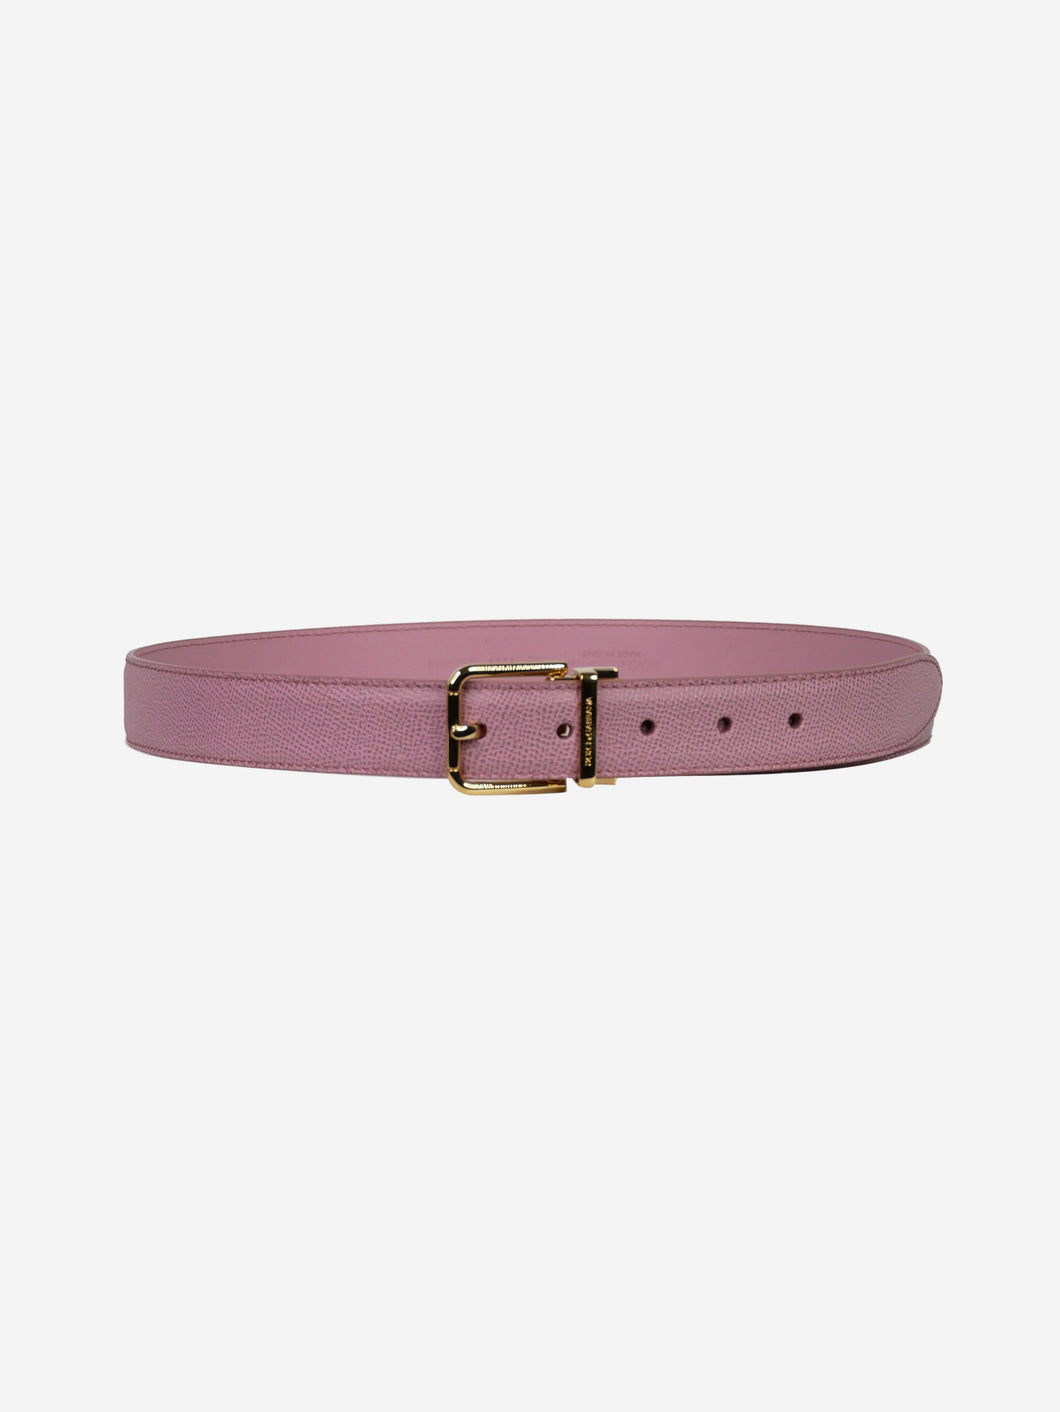 Dolce & Gabbana pre-owned pink belt with gold buckle | SOTT